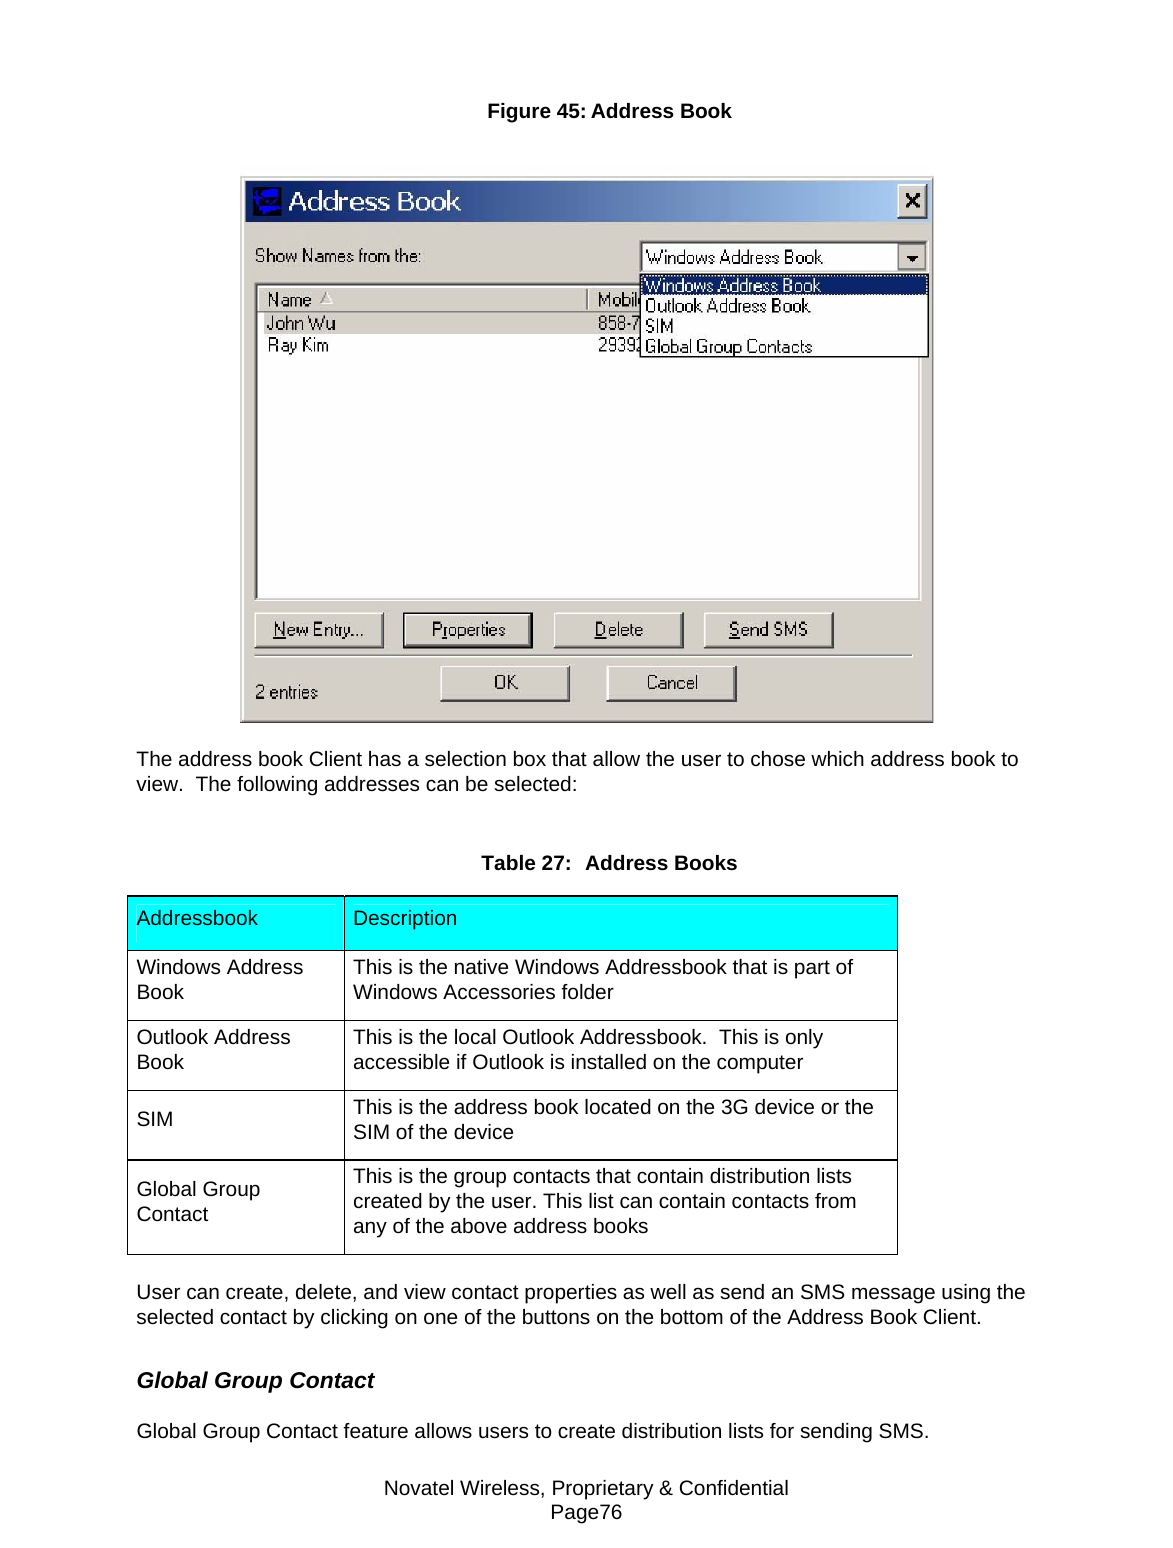 Novatel Wireless, Proprietary &amp; Confidential Page76 Figure 45: Address Book   The address book Client has a selection box that allow the user to chose which address book to view.  The following addresses can be selected:  Table 27:  Address Books Addressbook   Description  Windows Address Book   This is the native Windows Addressbook that is part of Windows Accessories folder  Outlook Address Book   This is the local Outlook Addressbook.  This is only accessible if Outlook is installed on the computer  SIM   This is the address book located on the 3G device or the SIM of the device  Global Group Contact  This is the group contacts that contain distribution lists created by the user. This list can contain contacts from any of the above address books   User can create, delete, and view contact properties as well as send an SMS message using the selected contact by clicking on one of the buttons on the bottom of the Address Book Client.  Global Group Contact  Global Group Contact feature allows users to create distribution lists for sending SMS.  